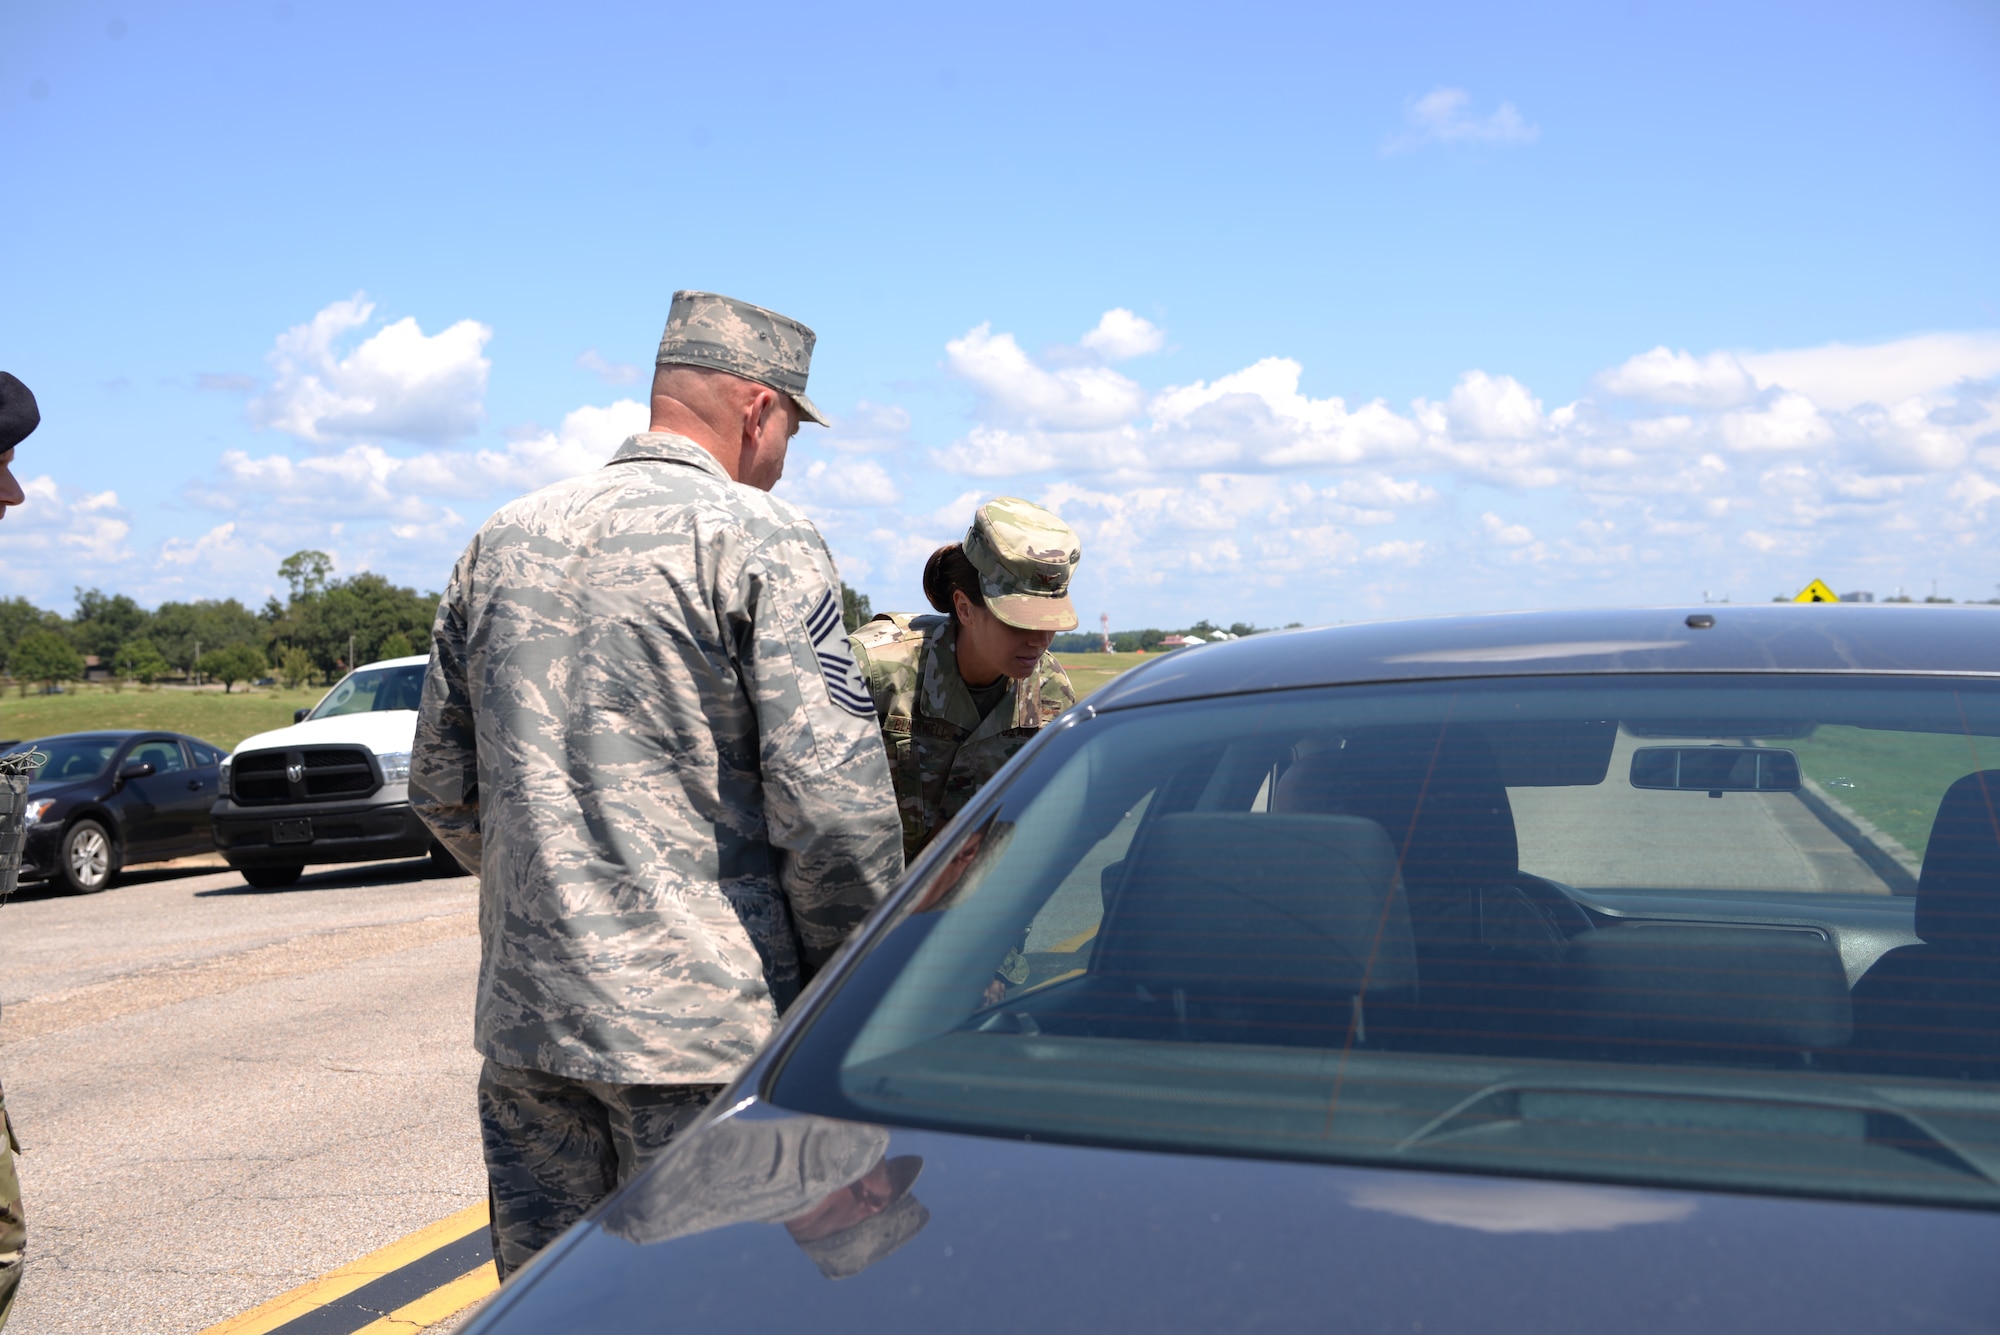 U.S Air Force Col. Heather Blackwell, 81st Training Wing commander, and Chief Master Sgt. David Pizzuto, 81st TRW command chief, address an individual pulled over for speeding in base housing on Keesler Air Force Base, Mississippi, September 10, 2019. The 81st Security Forces Squadron has recently started making efforts to crackdown on base speeding amidst concerns brought up during the Keesler Housing Forum. (U.S Air Force photo by Airman 1st Class Spencer Tobler)